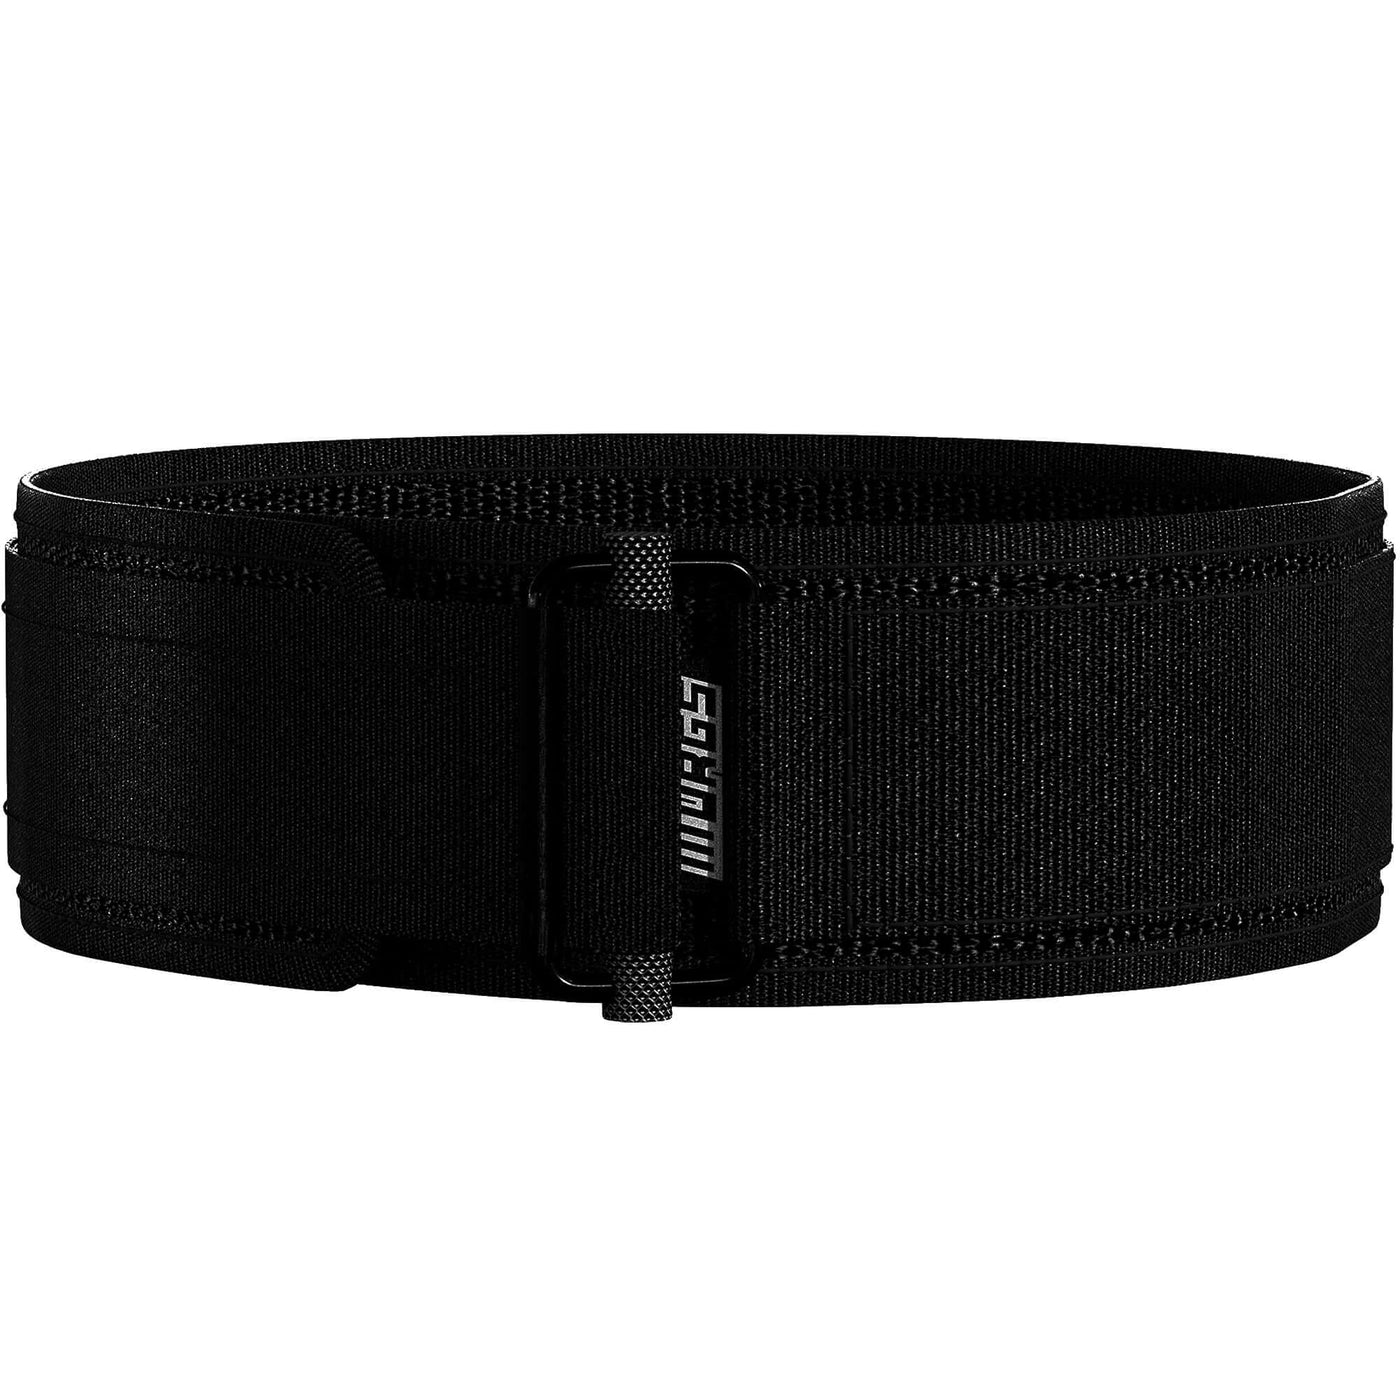 Murgs 4 inch self locking belt with steel buckle and velcro